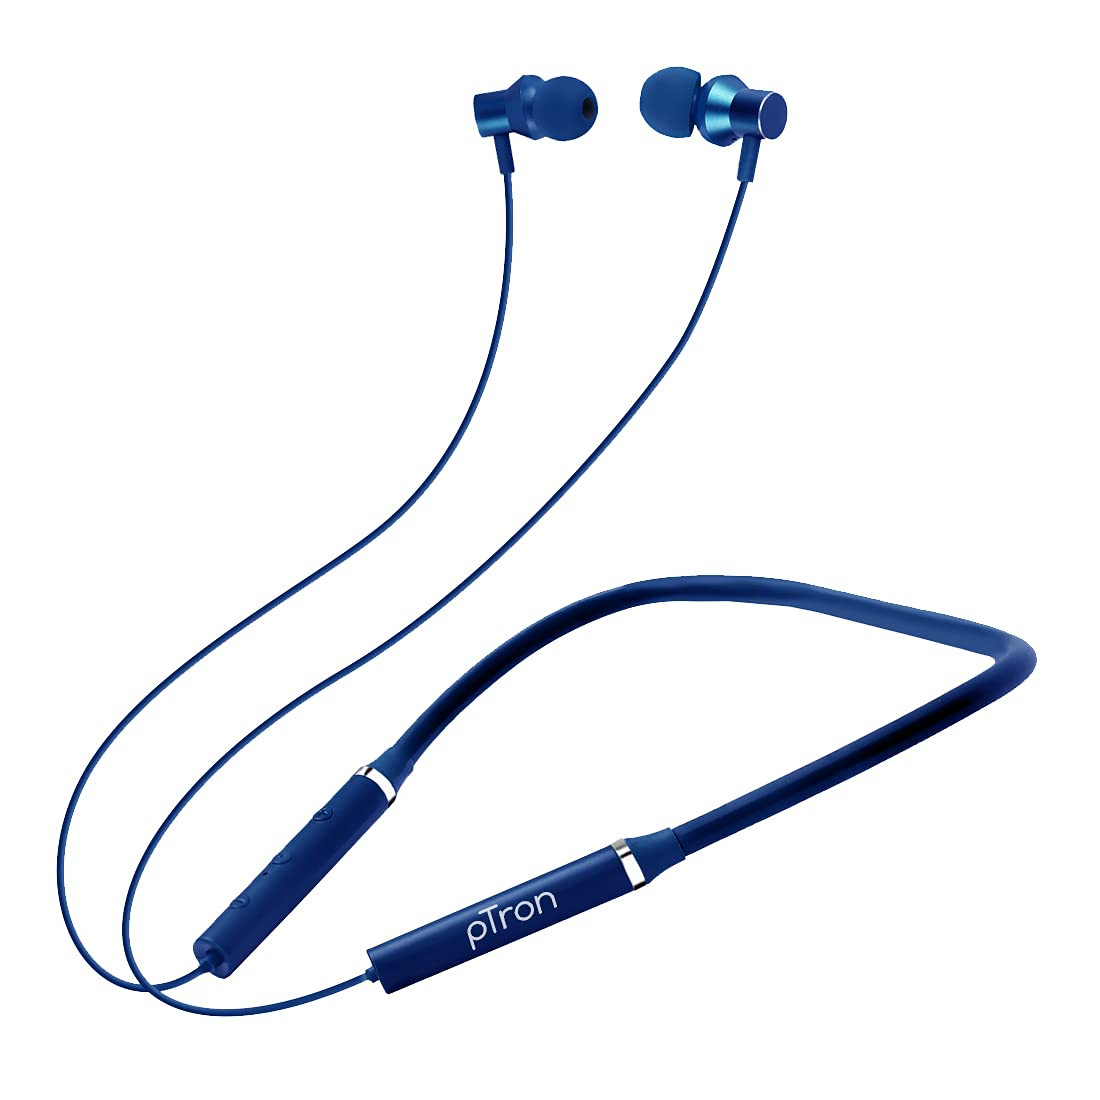 pTron Tangentbeat in-Ear Bluetooth Wireless Headphones with Mic Punchy Bass 10mm Drivers